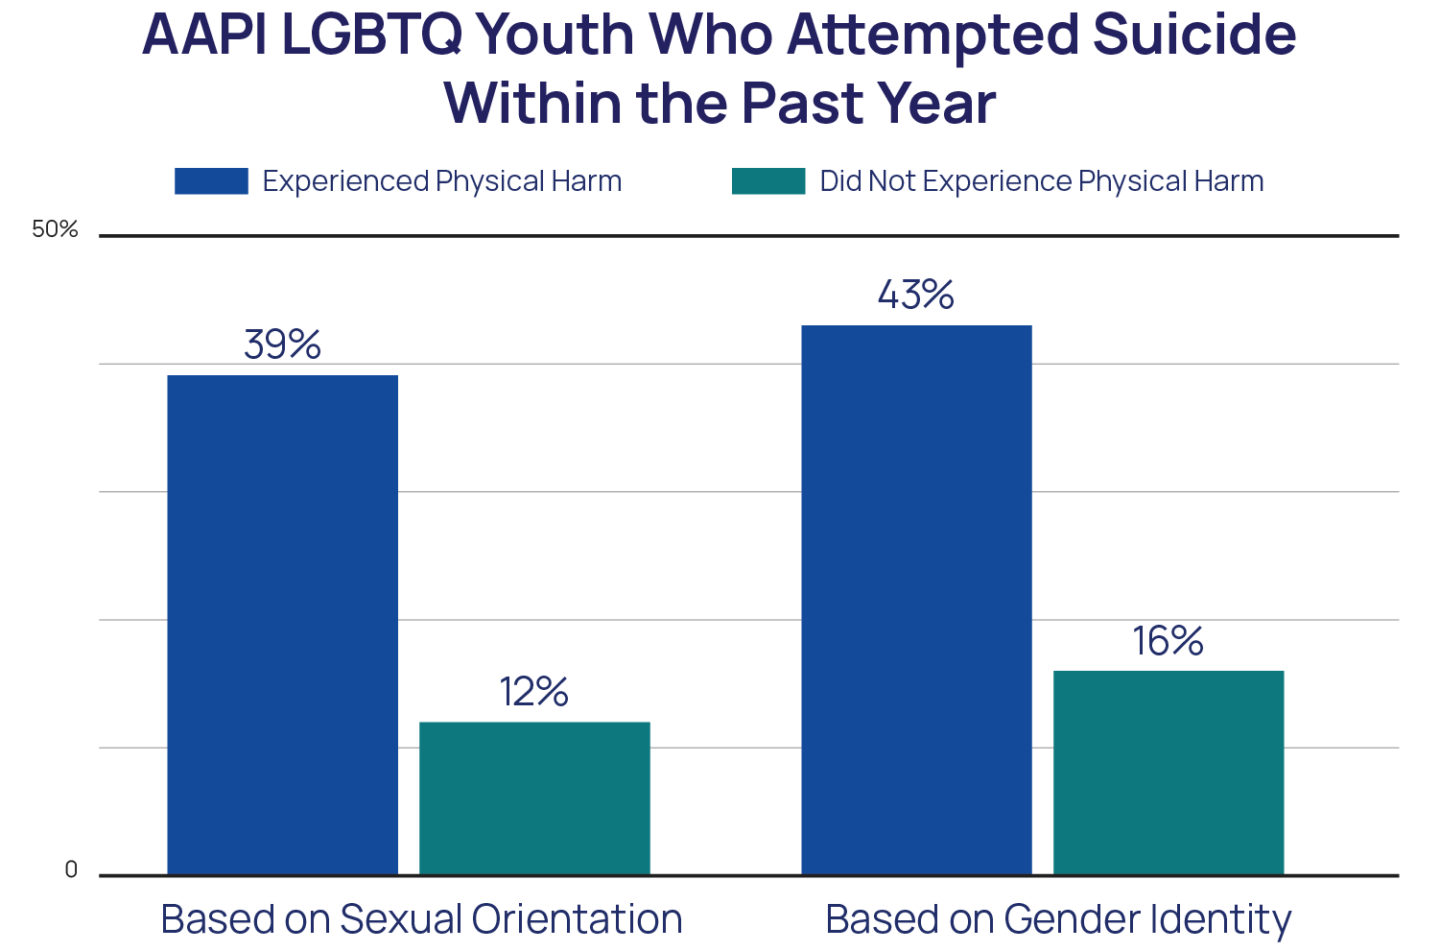 APPI LGBTQ Youth Who attempted suicide with the past year bar chart